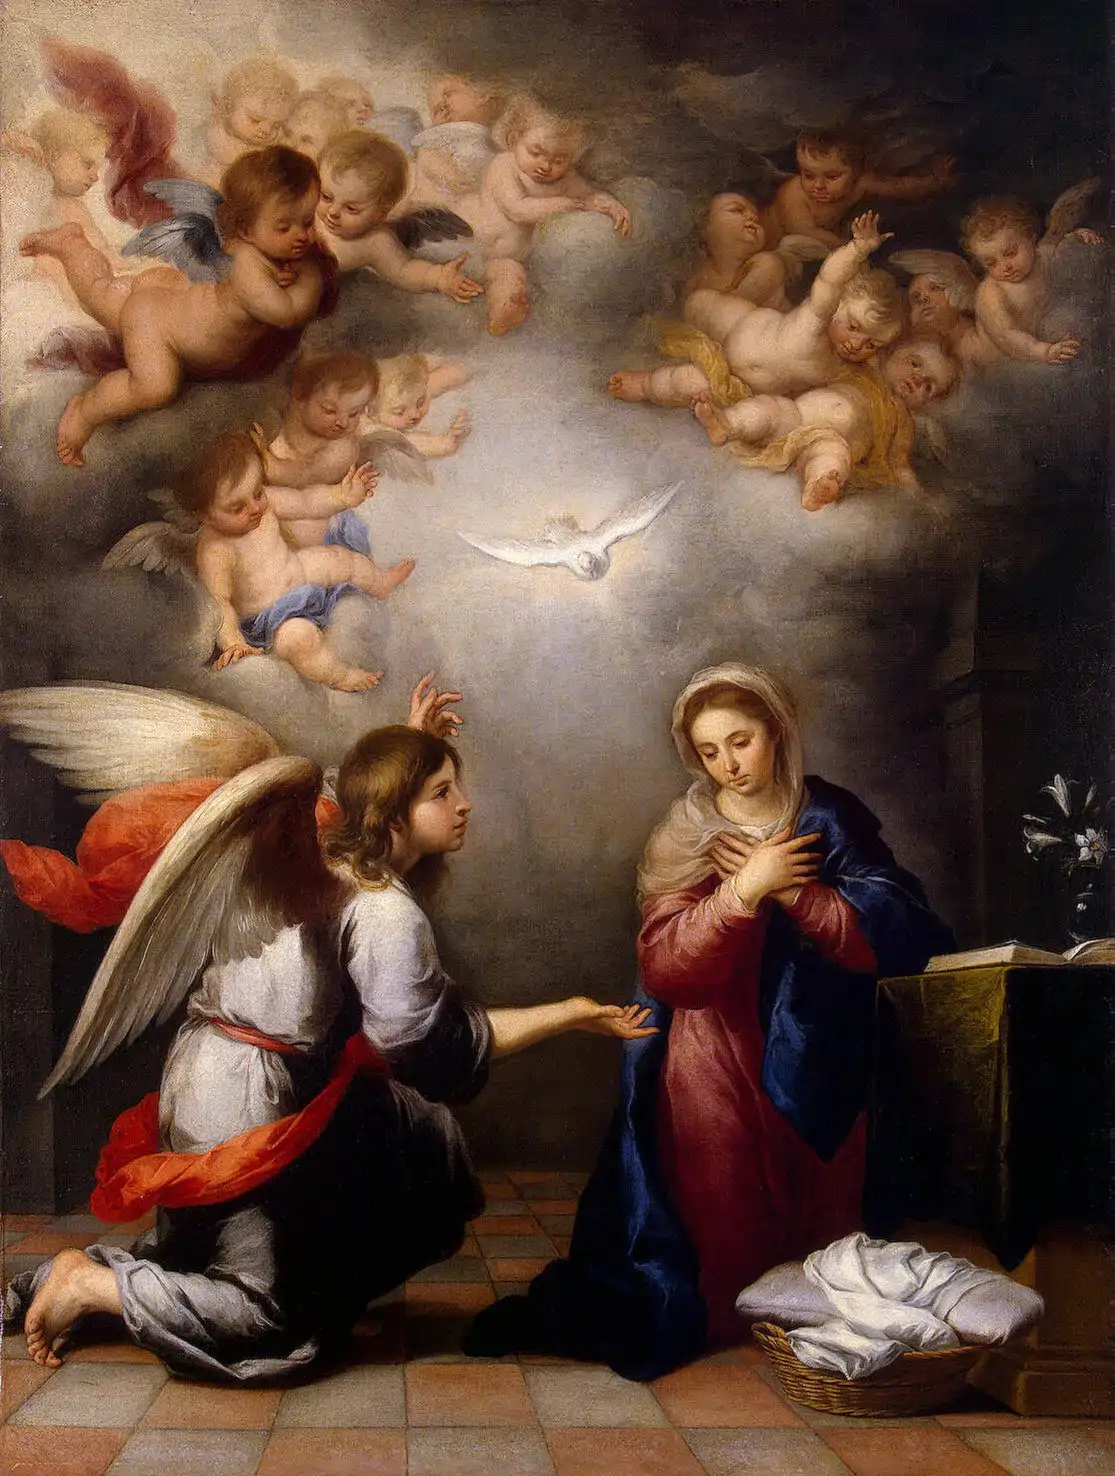 Mary learns that she has been chosen to be the mother of Jesus.